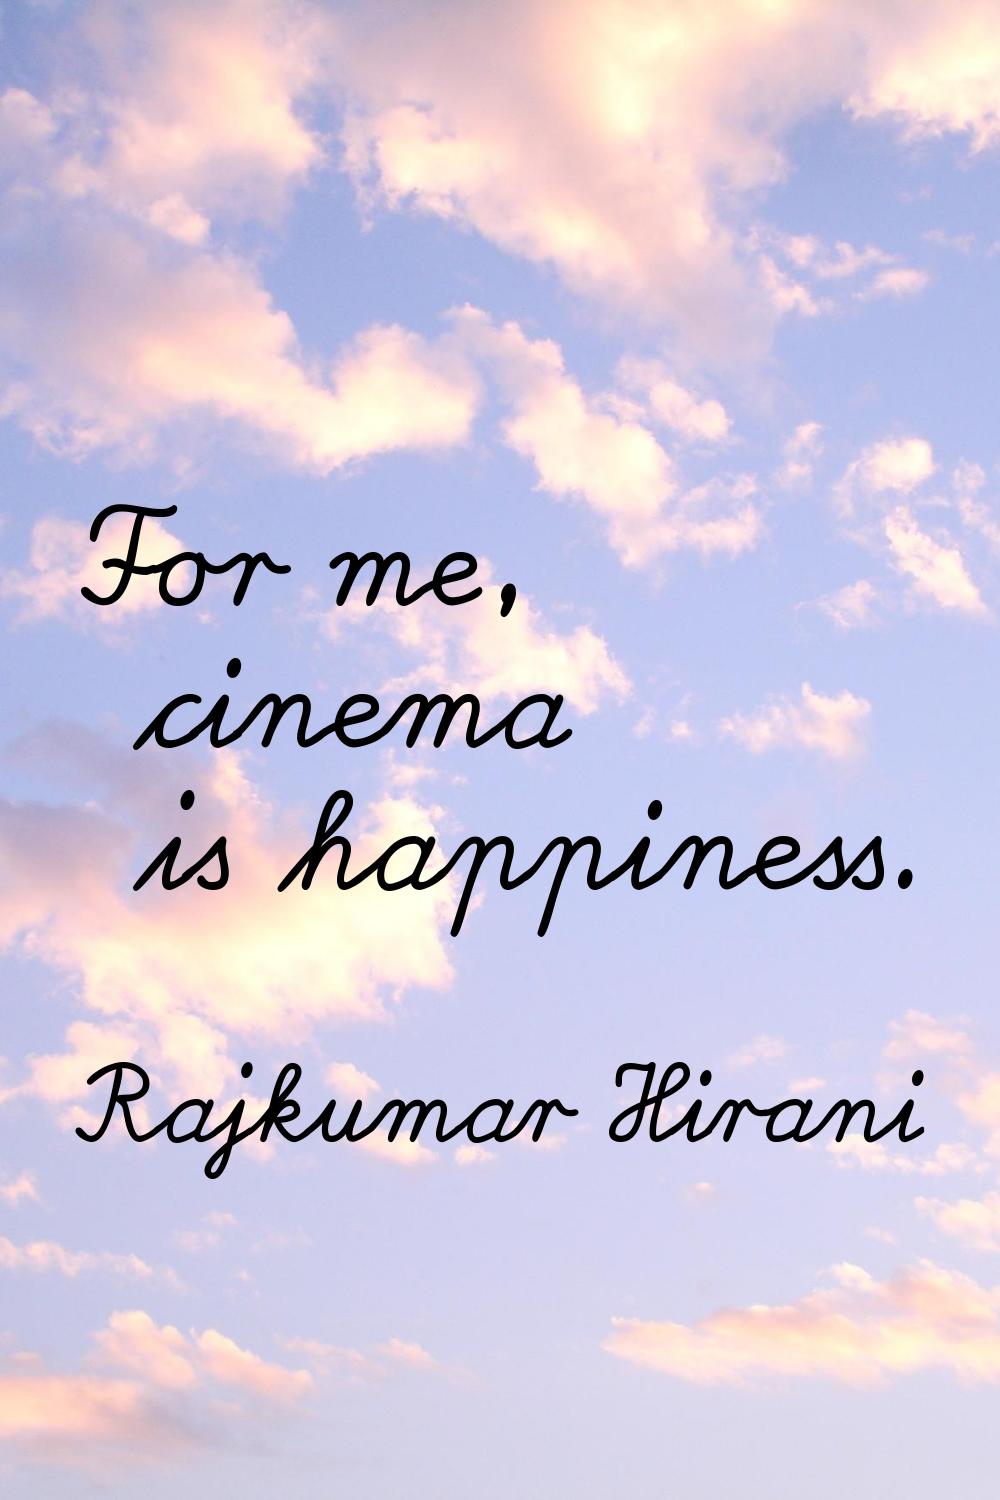 For me, cinema is happiness.